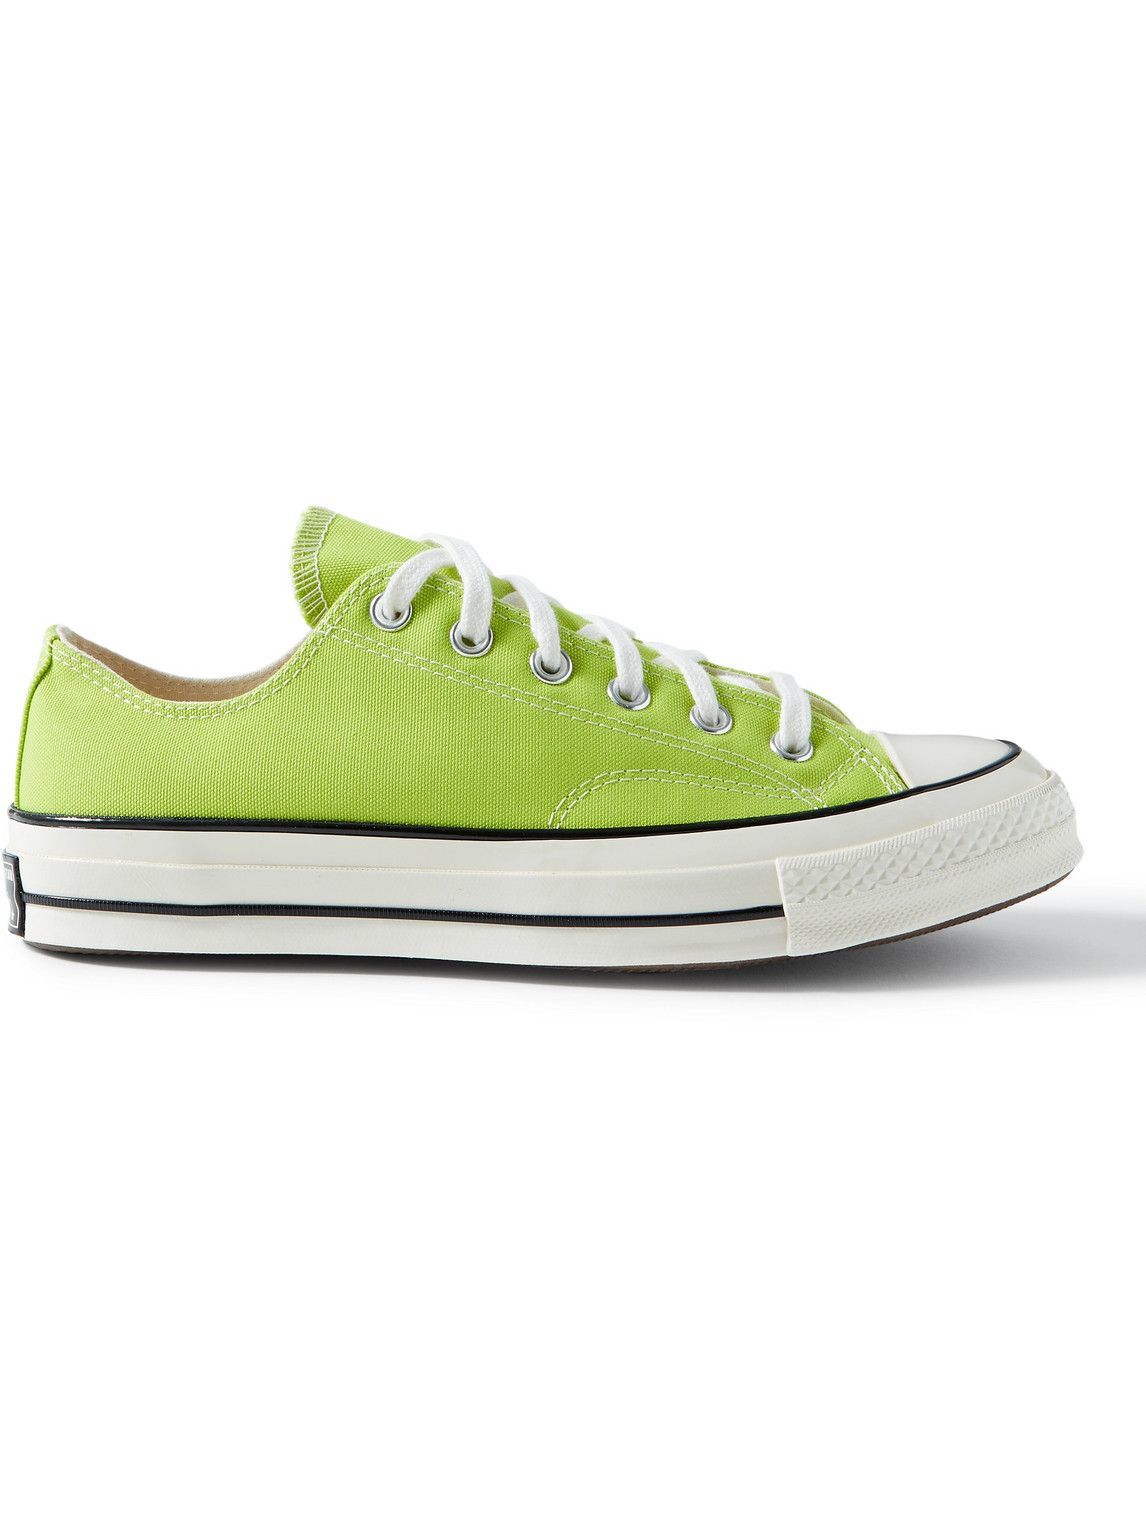 Converse - Chuck 70 Recycled Canvas Sneakers - Green Converse